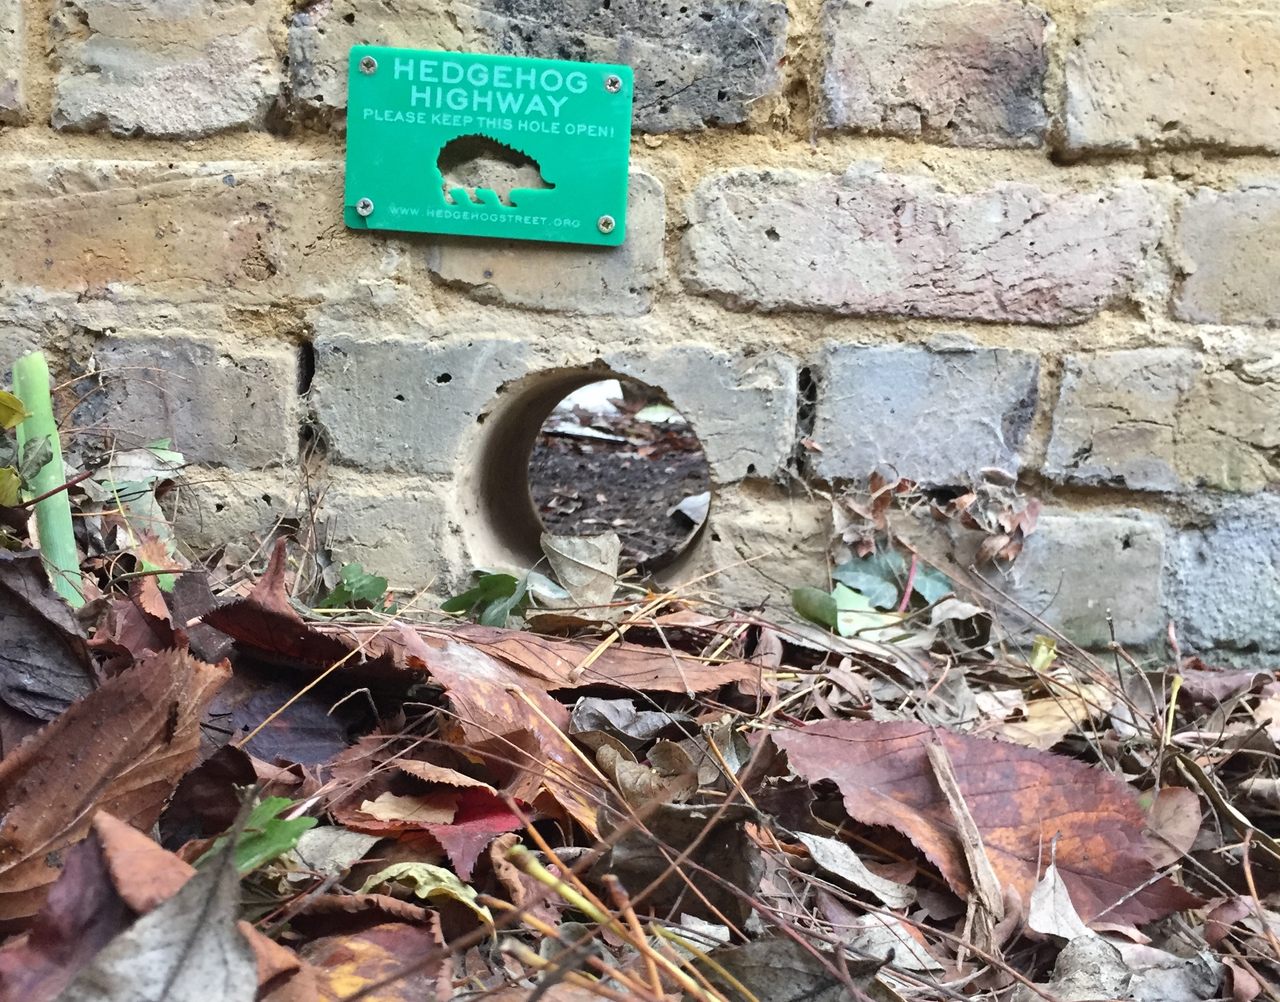 Holes drilled through walls give hedgehogs little pathways from one garden to another.